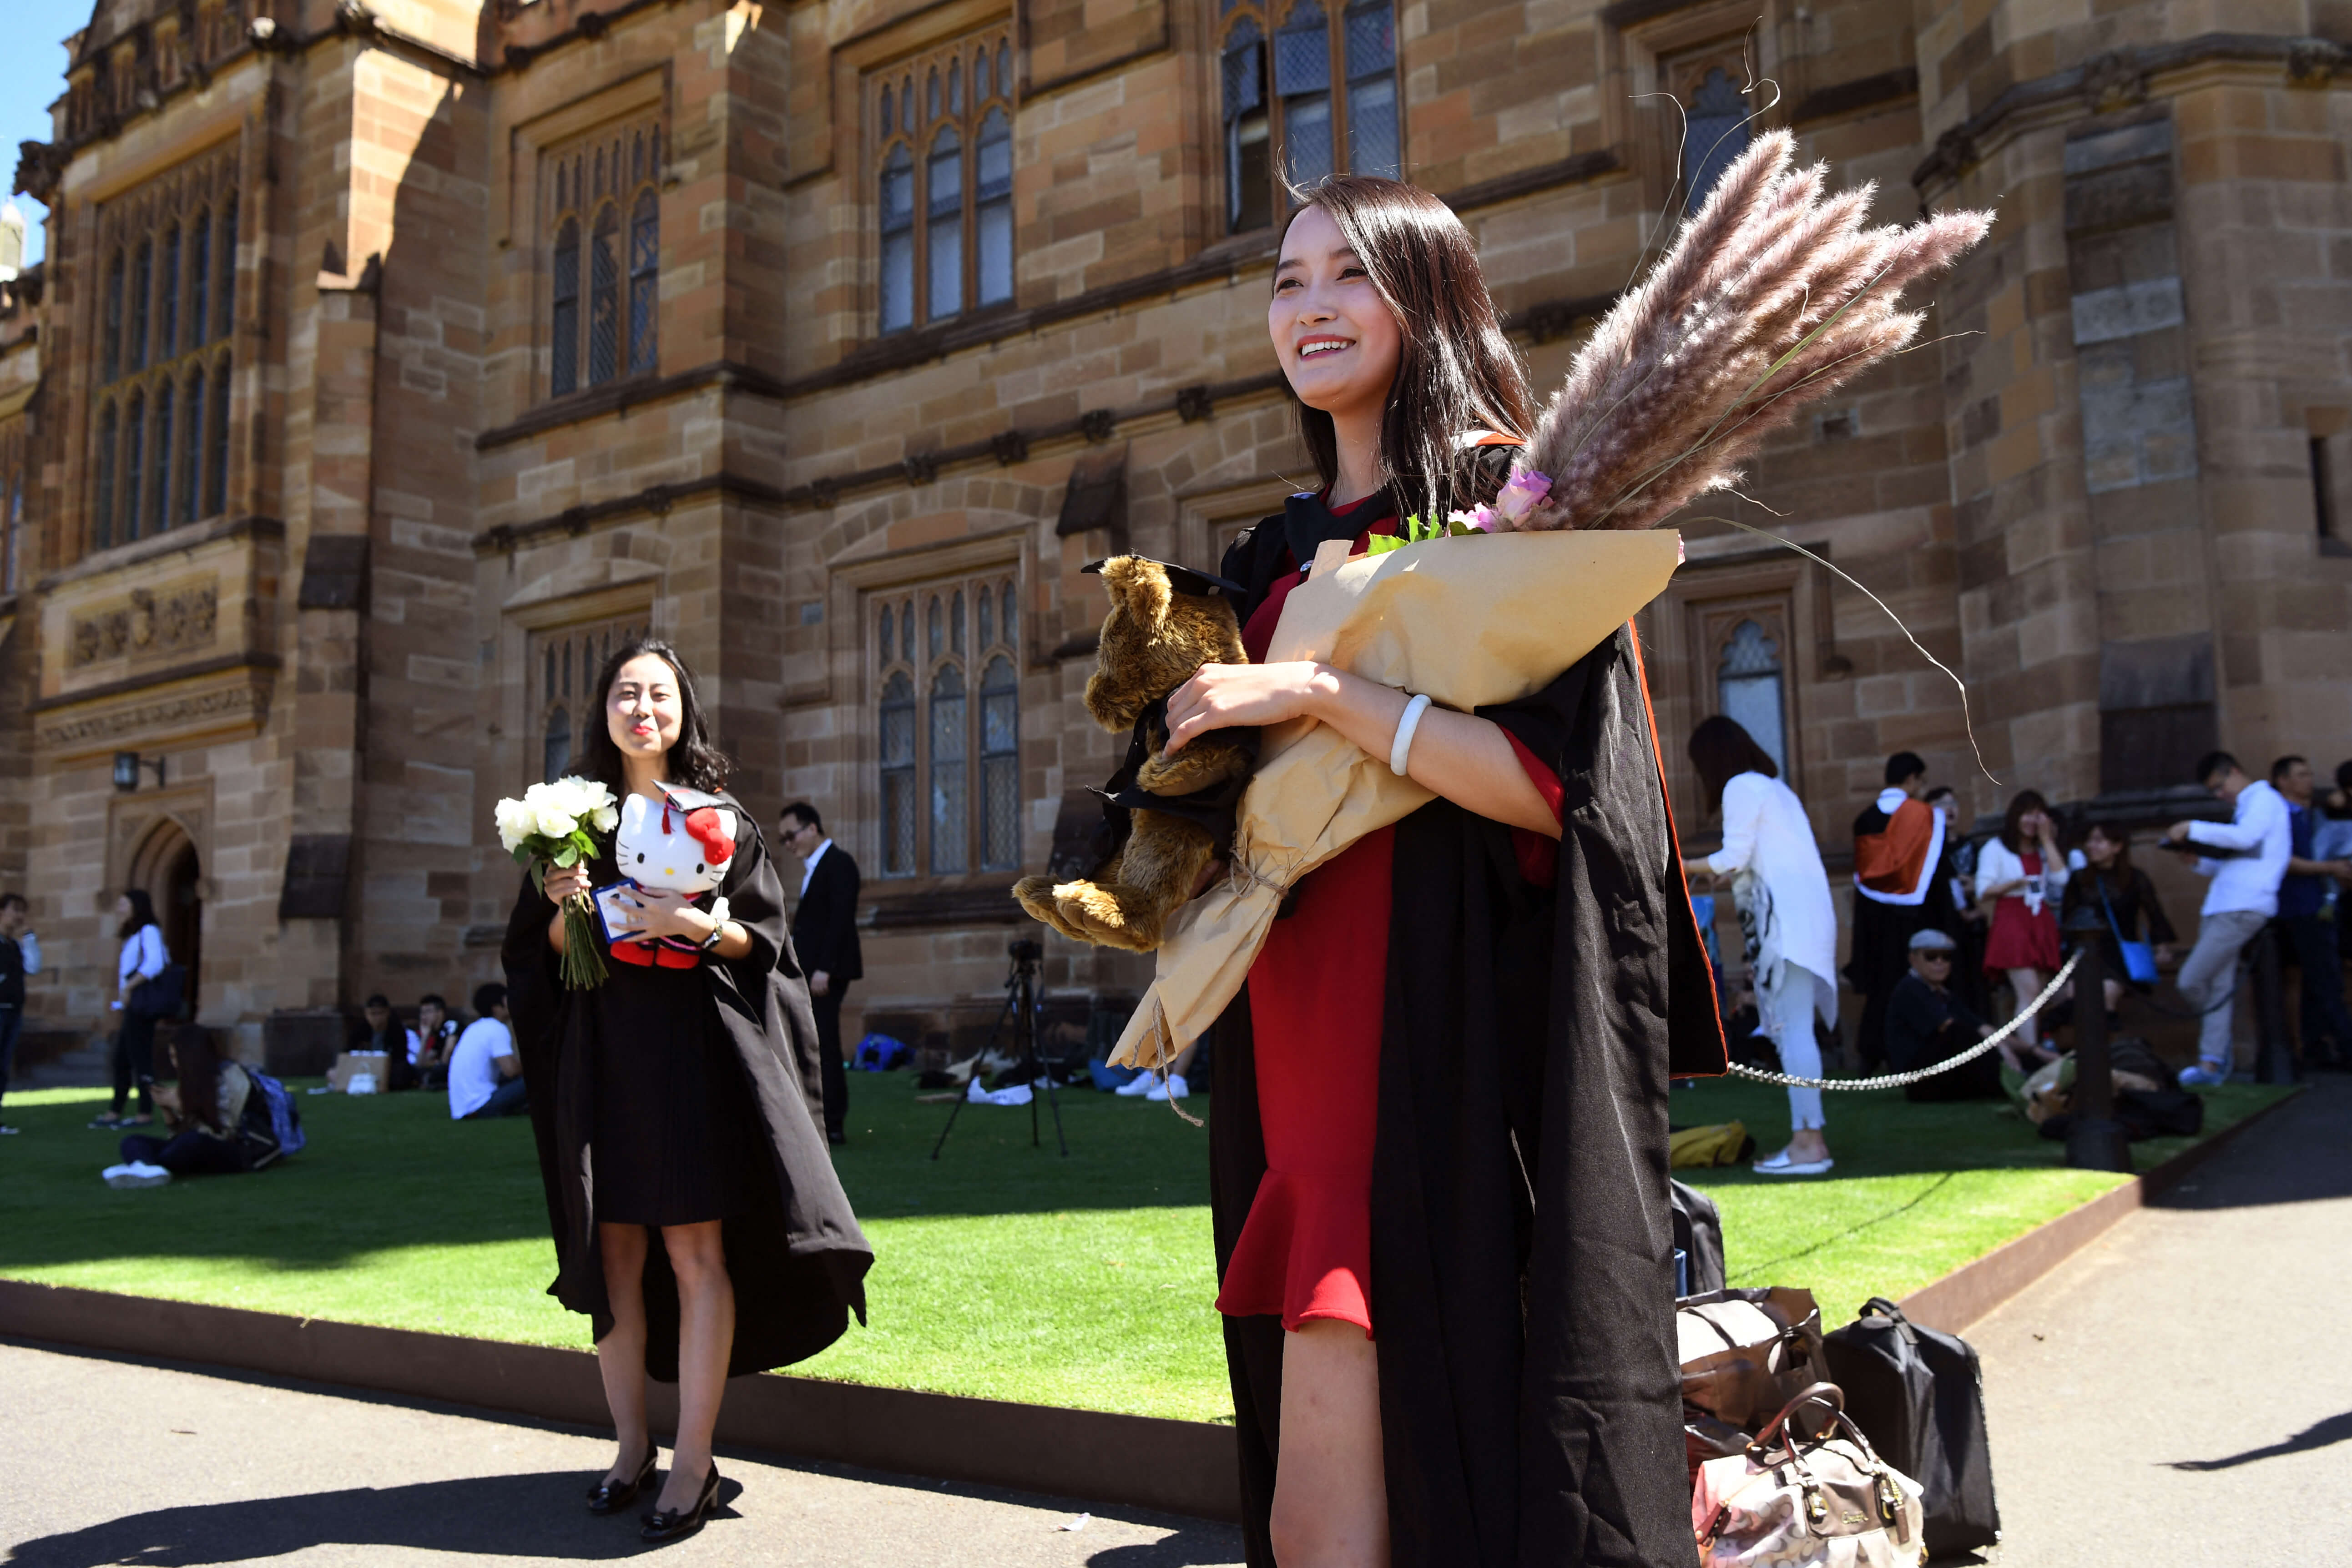 Chinese students keen to return to Australia: report